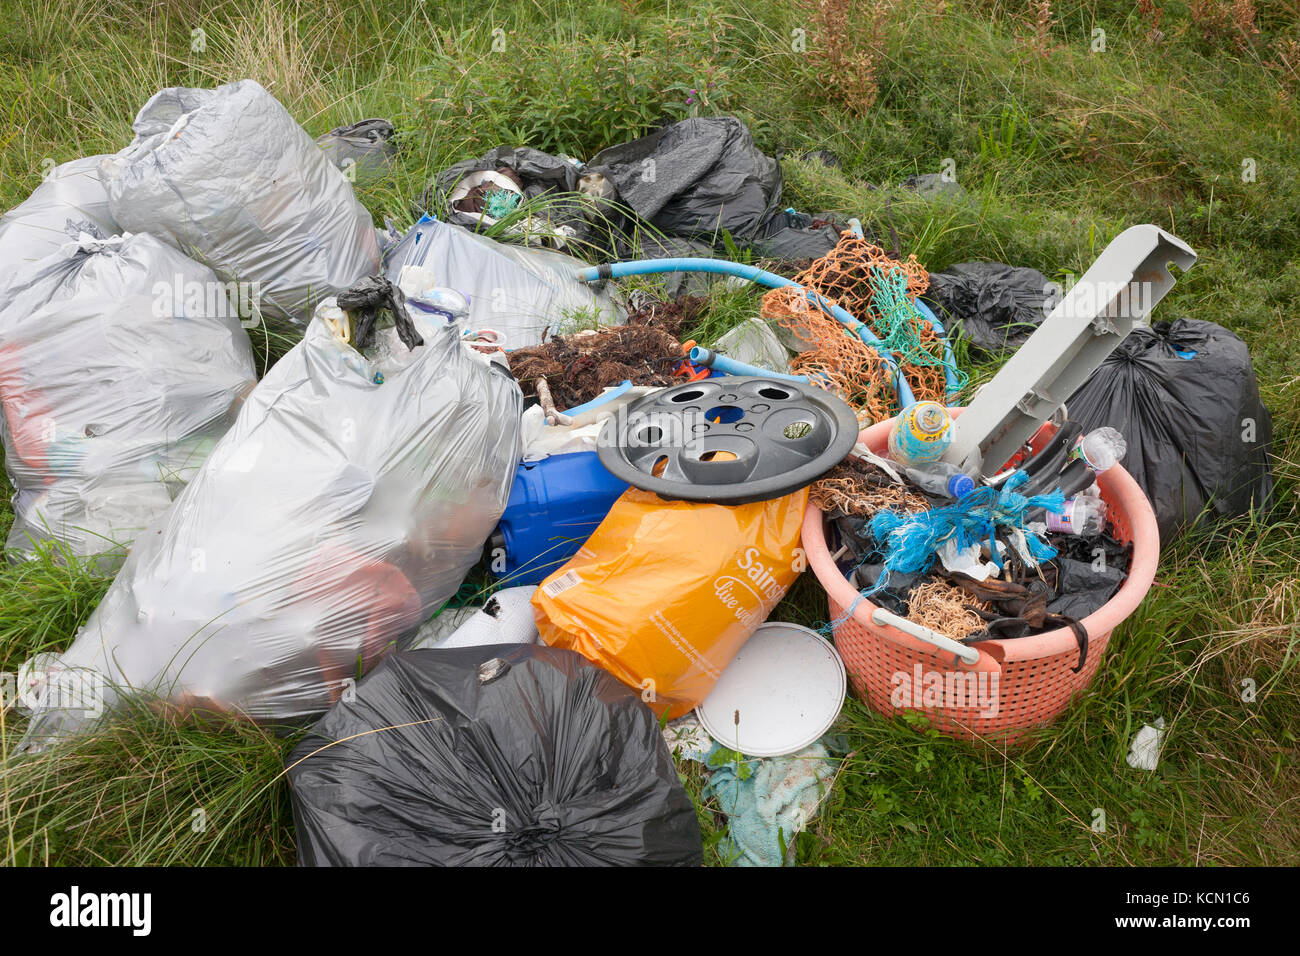 A pile of assorted plastic materials await removal from the coastal landscape, having been collected by volunteers from a beach on Holy Island, on 27th September 2017, on Lindisfarne Island, Northumberland, England. The amount of rubbish found dumped on UK beaches rose by a third last year, according to a new report. More than 8,000 plastic bottles were collected by the Marine Conservation Society’s annual beach clean-up at seaside locations from Orkney to the Channel Islands on one weekend in September 2016. The Holy Island of Lindisfarne, also known simply as Holy Island, is an island off th Stock Photo